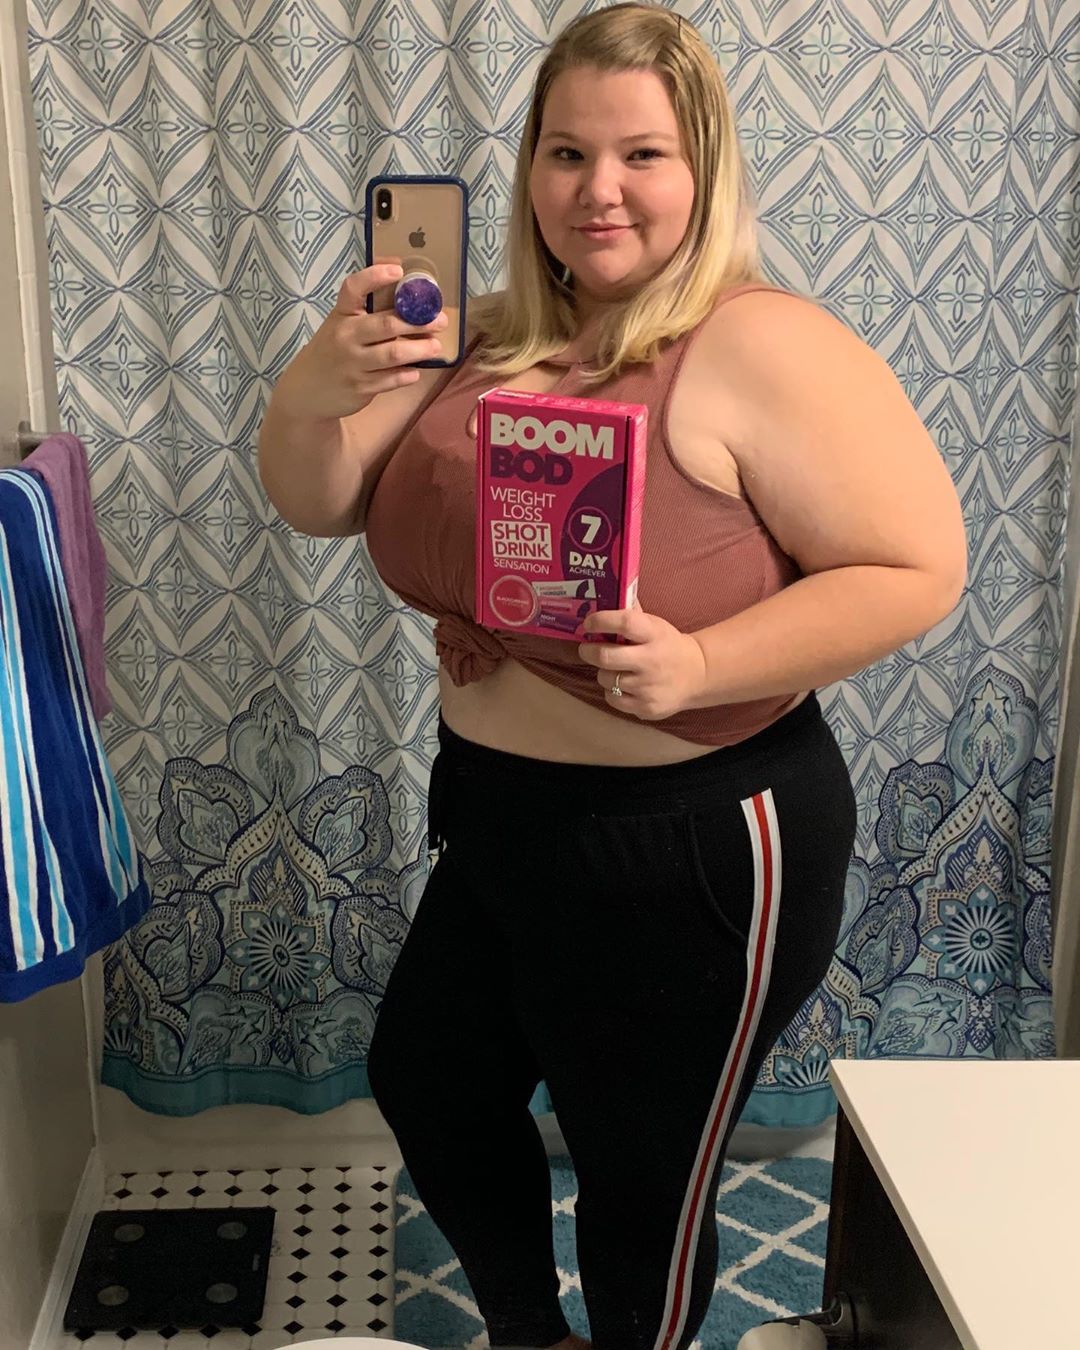 90 Day Fiance Nicole Nafziger Weight Loss — New Crop Top Photo In Touch Weekly 